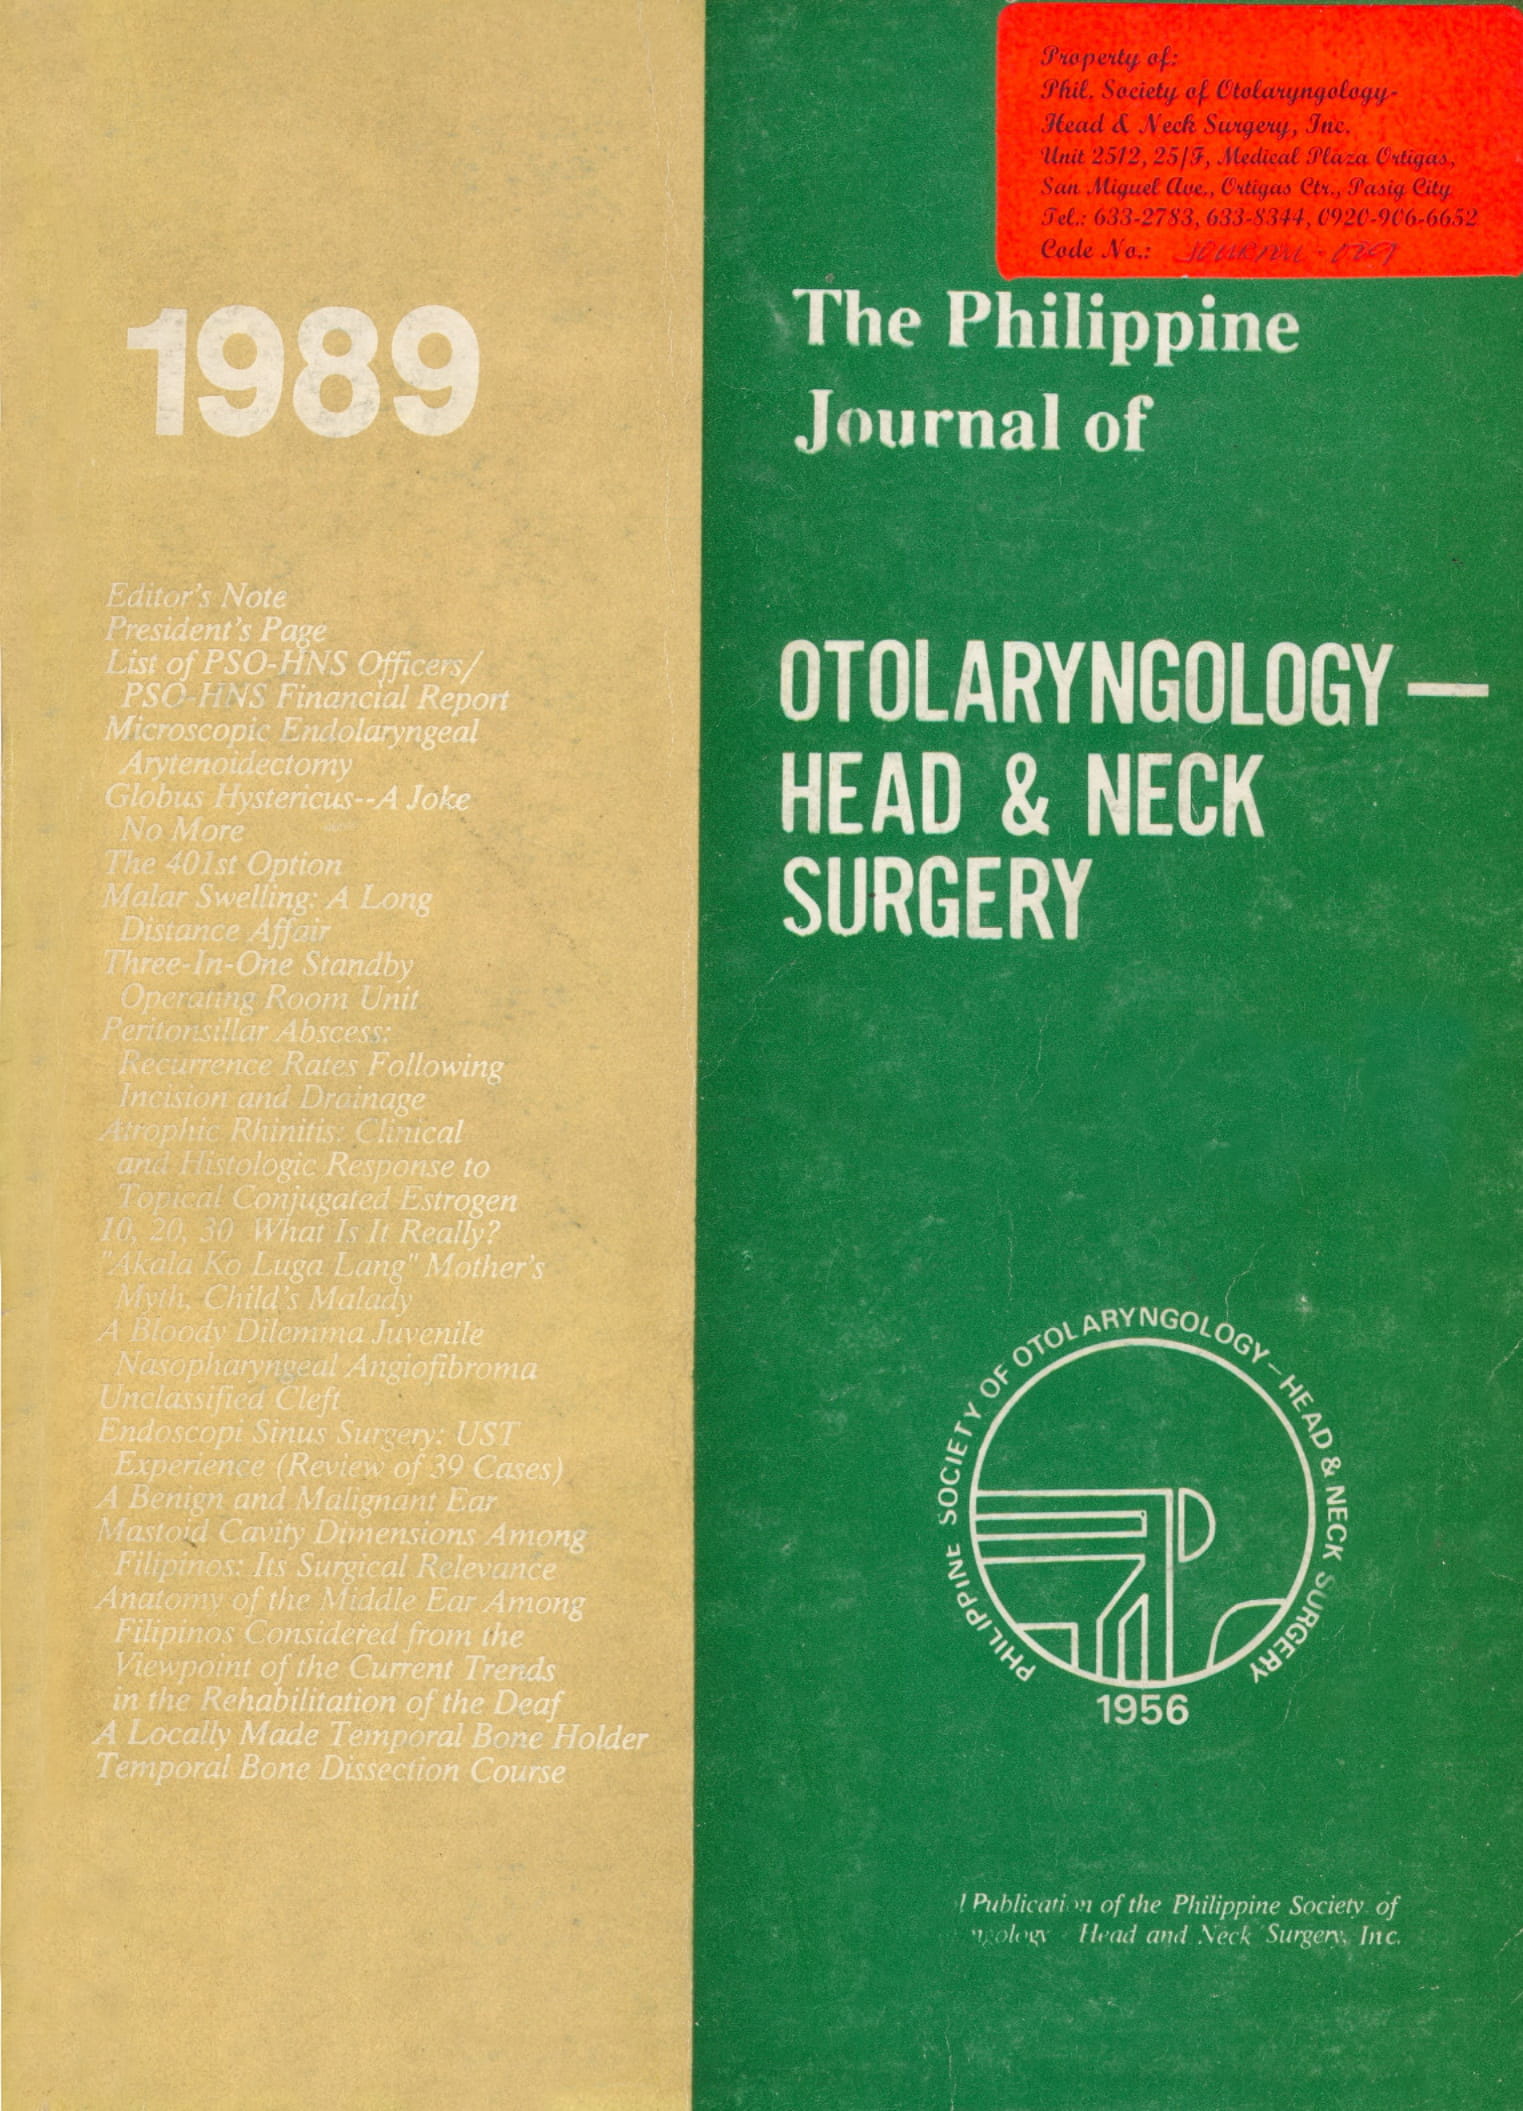 					View 1989: Philippine Journal of Otolaryngology-Head and Neck Surgery
				